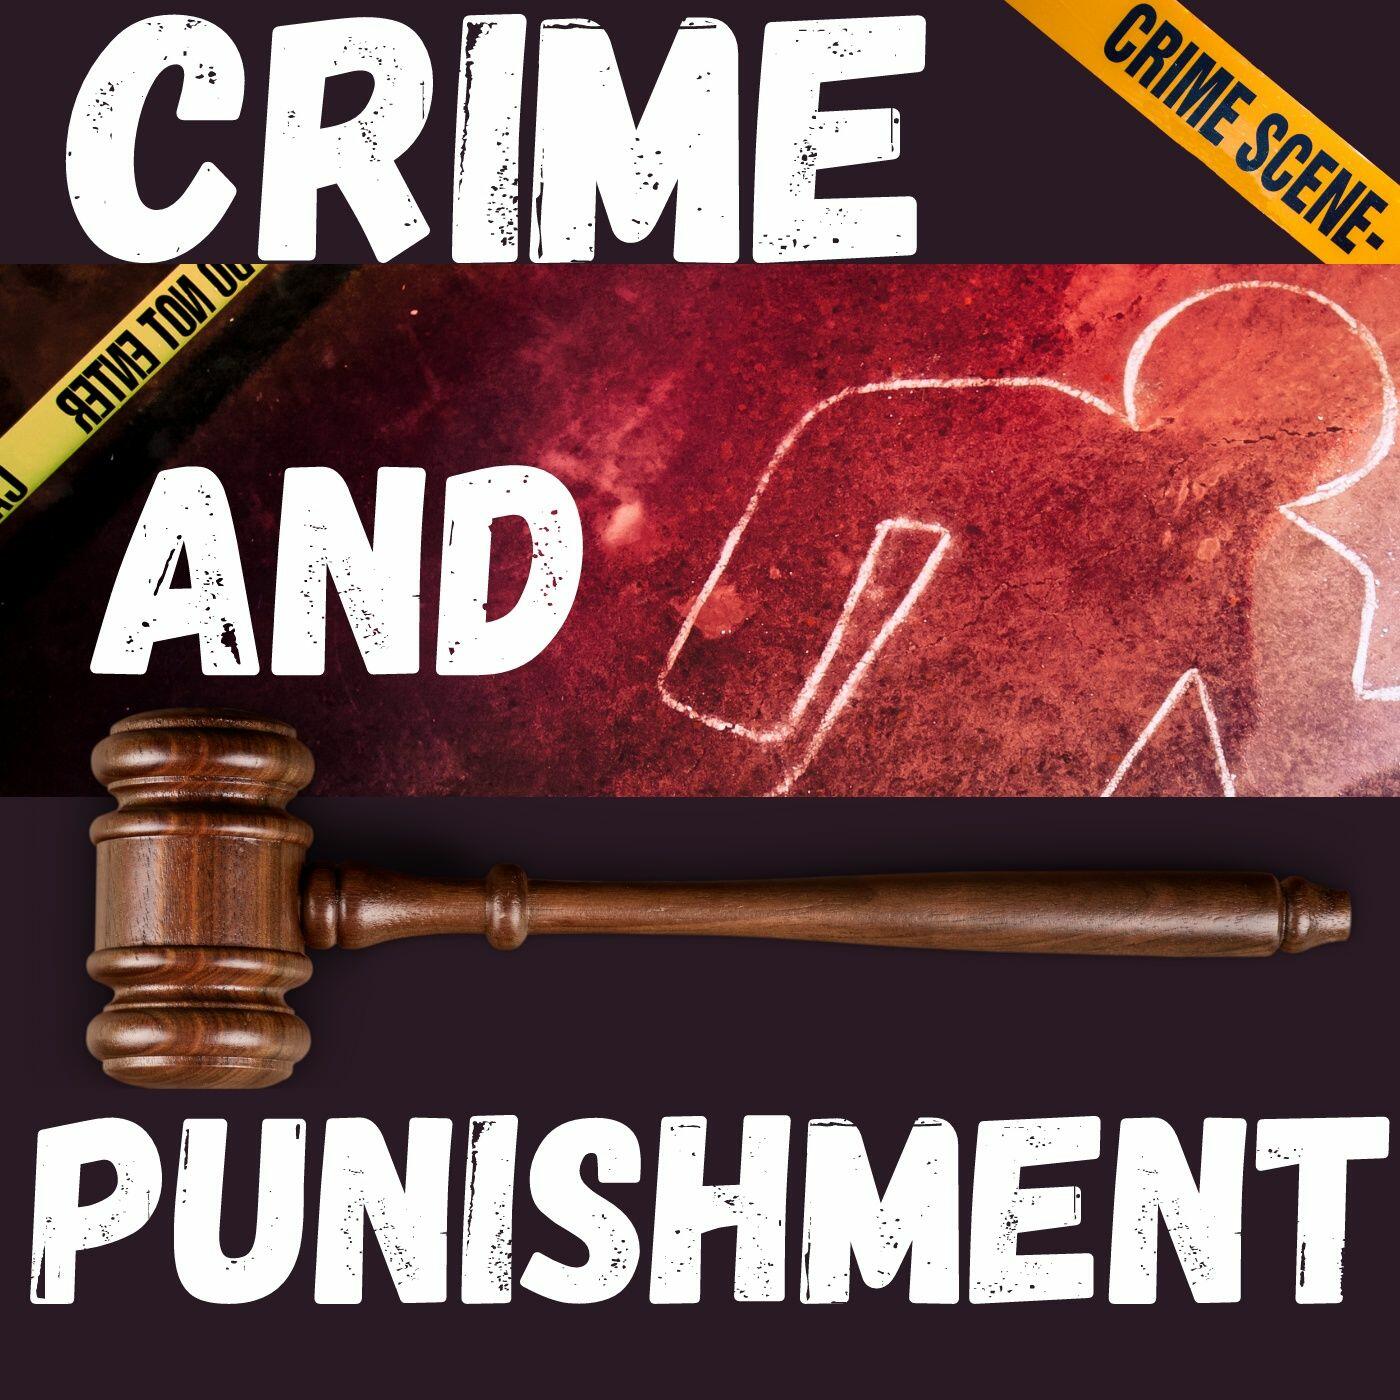 Part 2 chapter 4 - Crime and Punishment - Fyodor Dostoevsky - Crime and